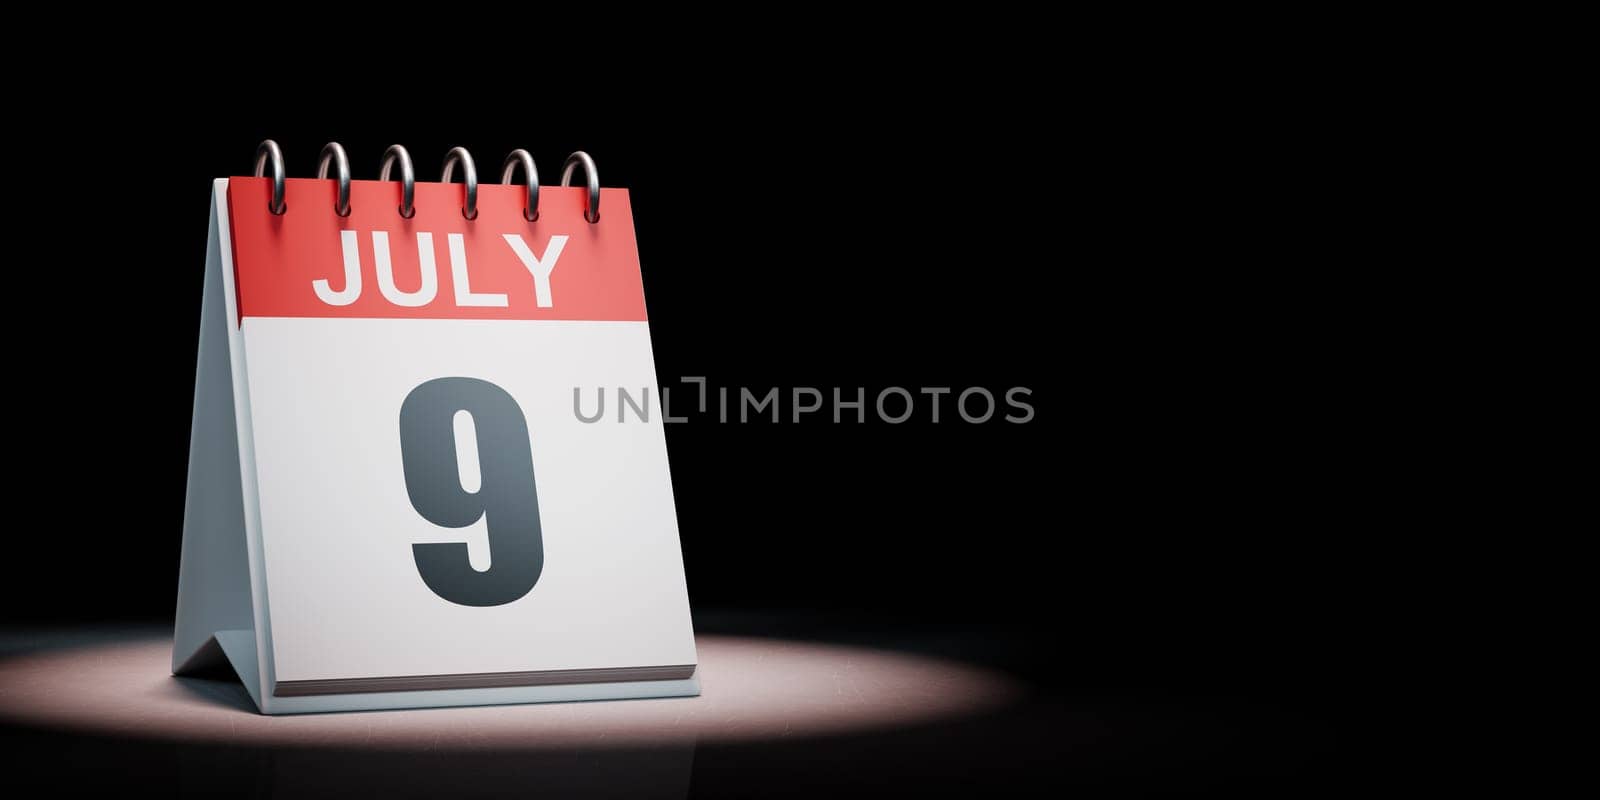 Red and White July 9 Desk Calendar Spotlighted on Black Background with Copy Space 3D Illustration